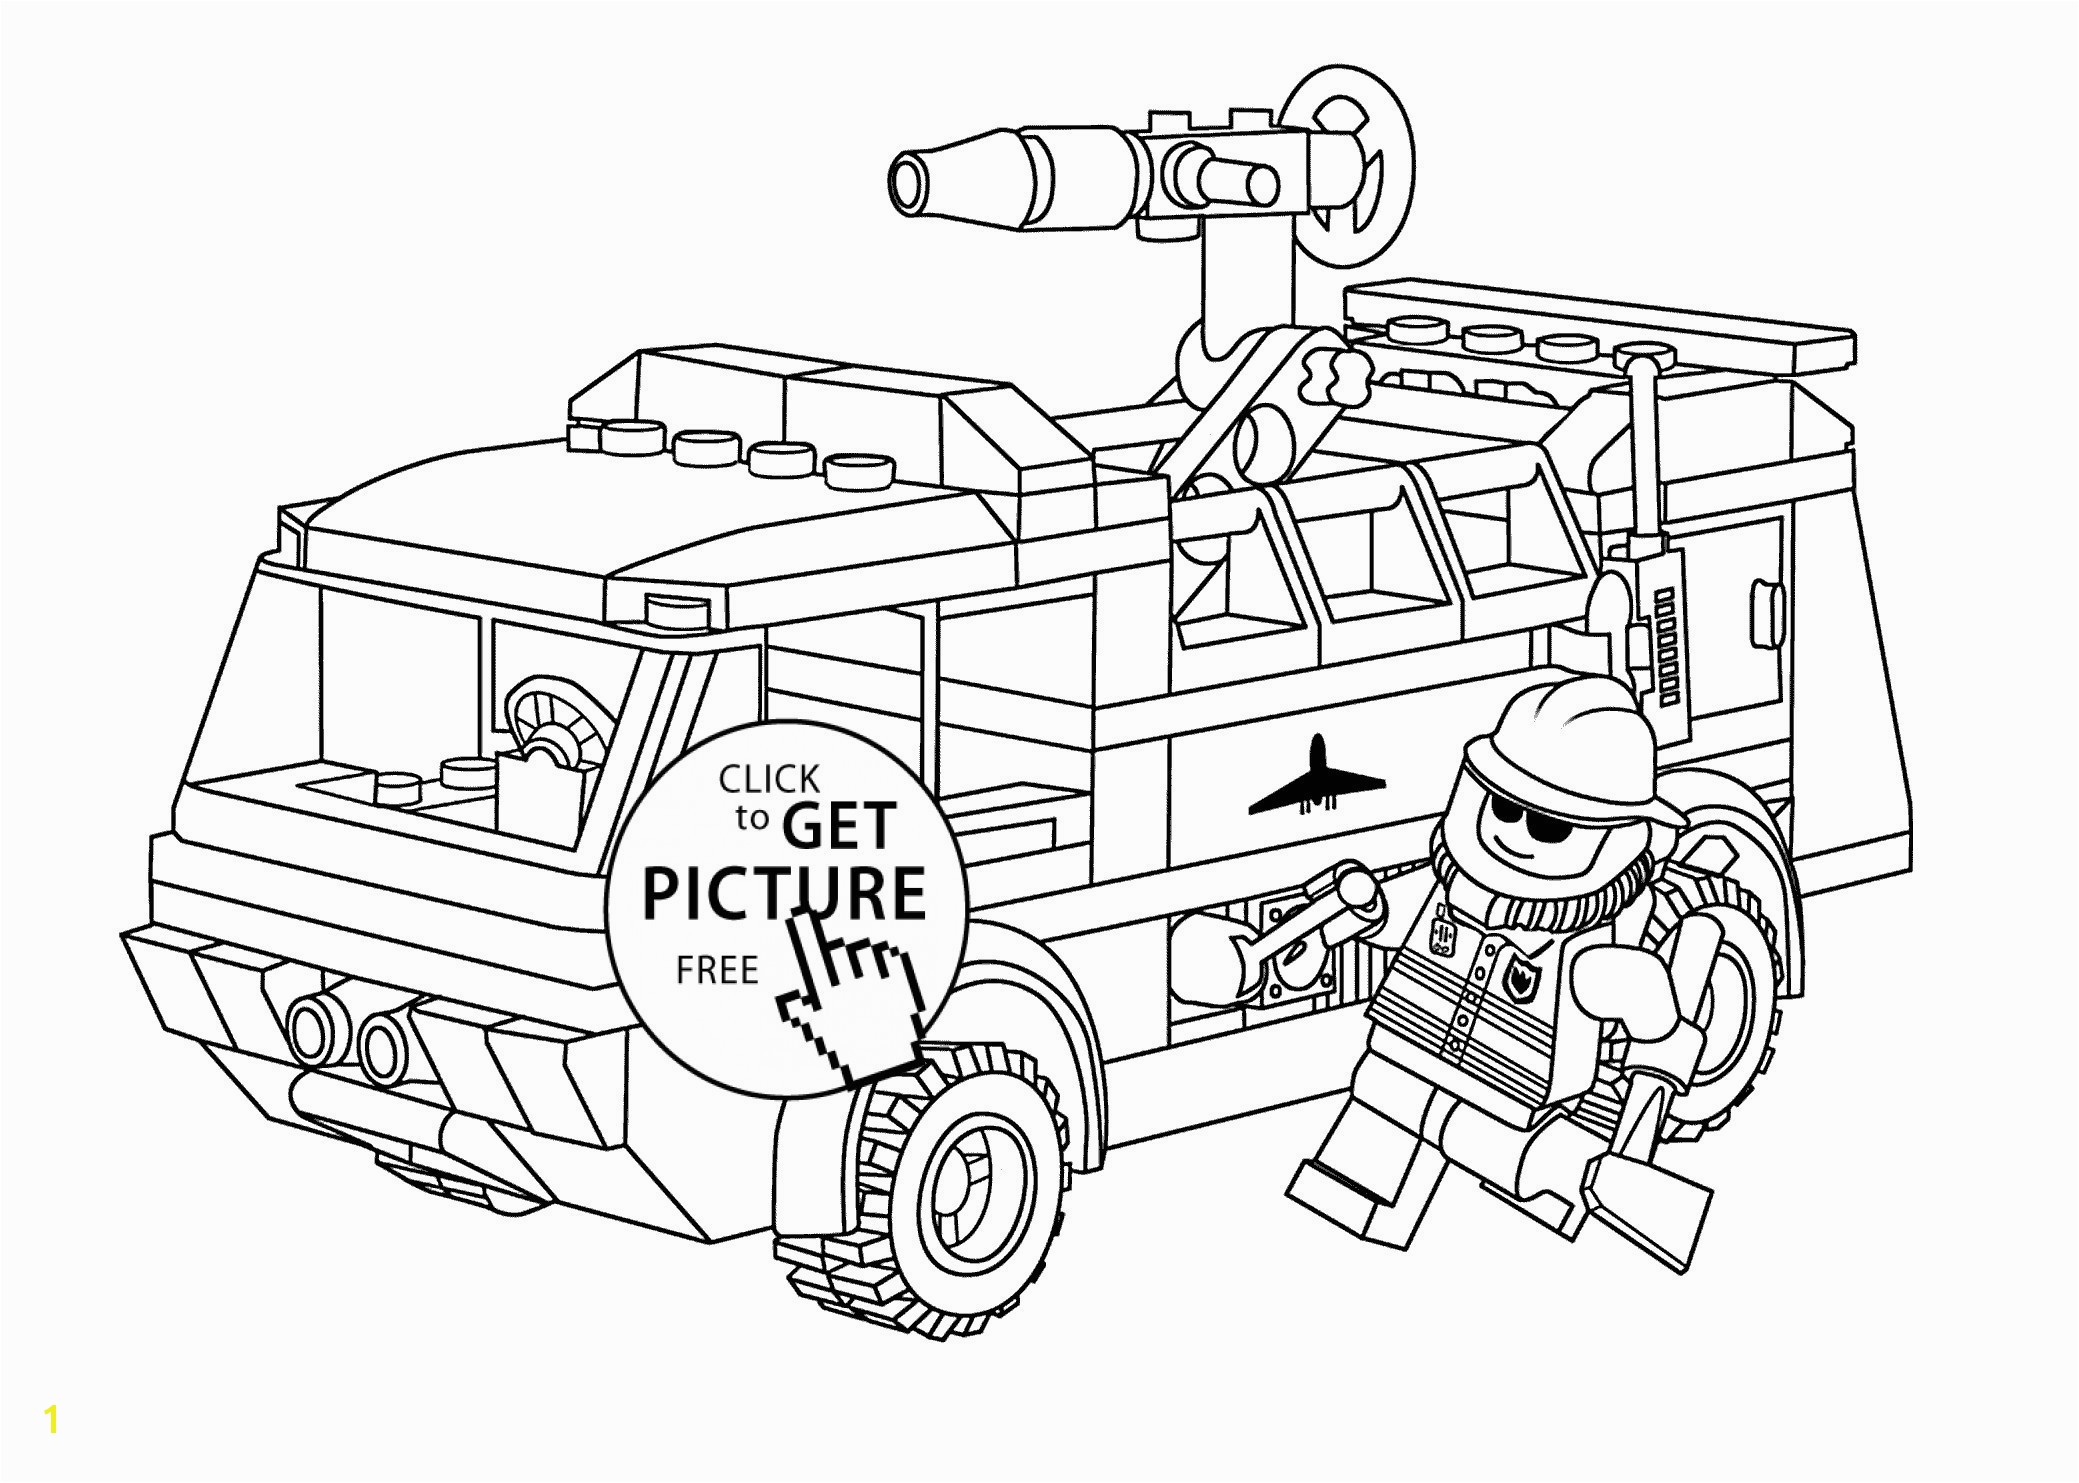 Preposition Coloring Pages Truck Coloring Pages Truckdome Free Coloring Pages Prepositions to